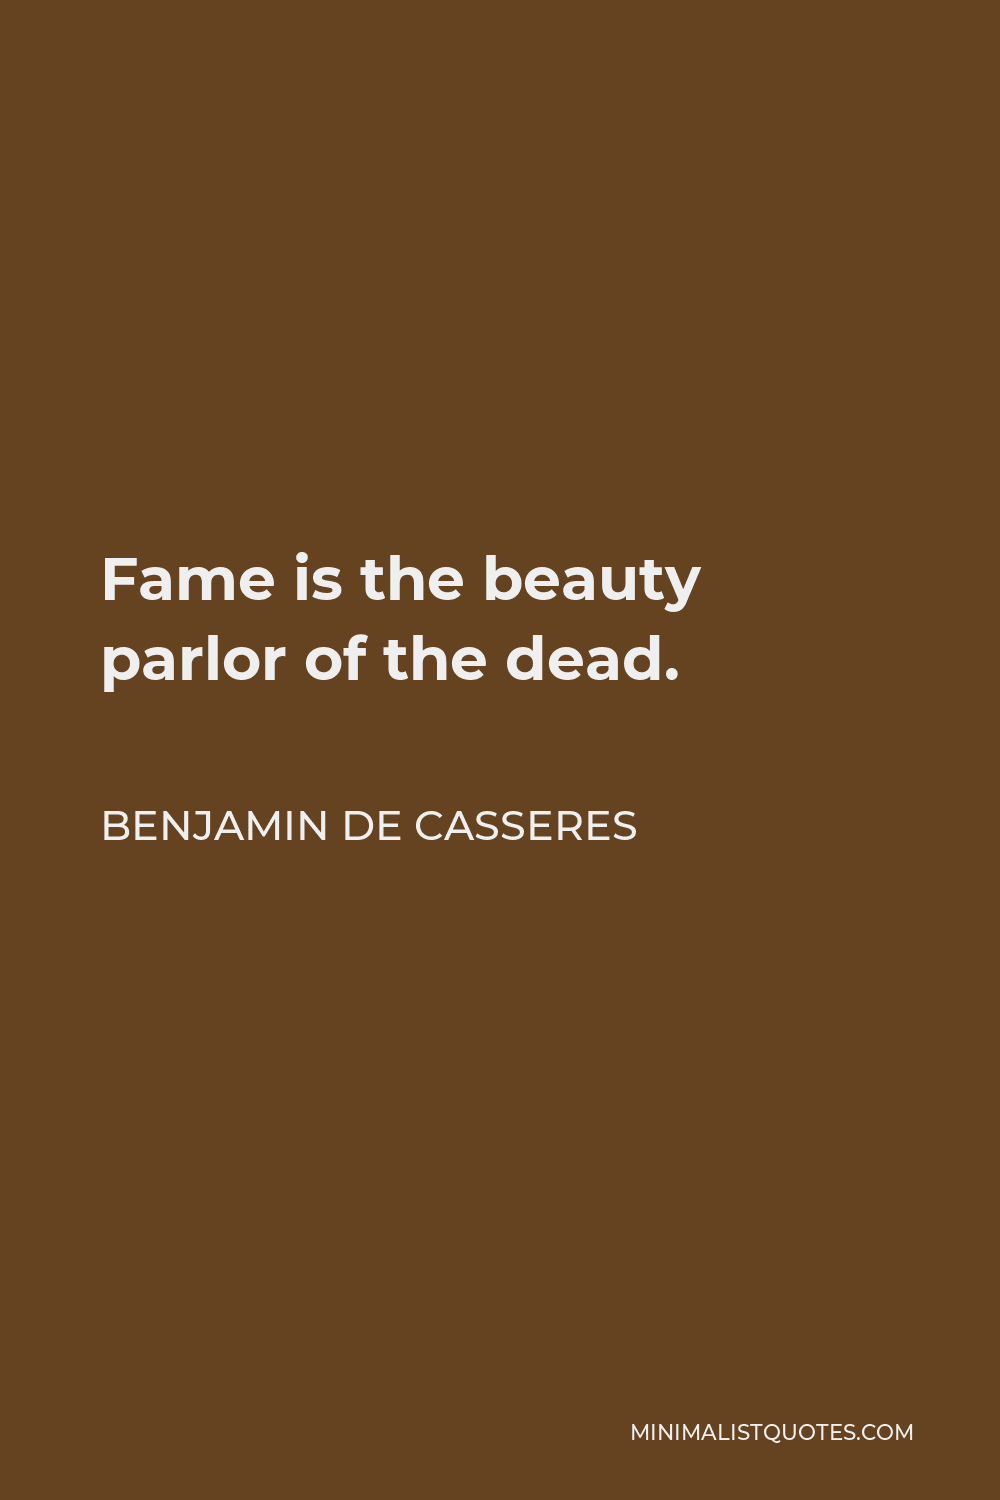 Benjamin De Casseres Quote - Fame is the beauty parlor of the dead.